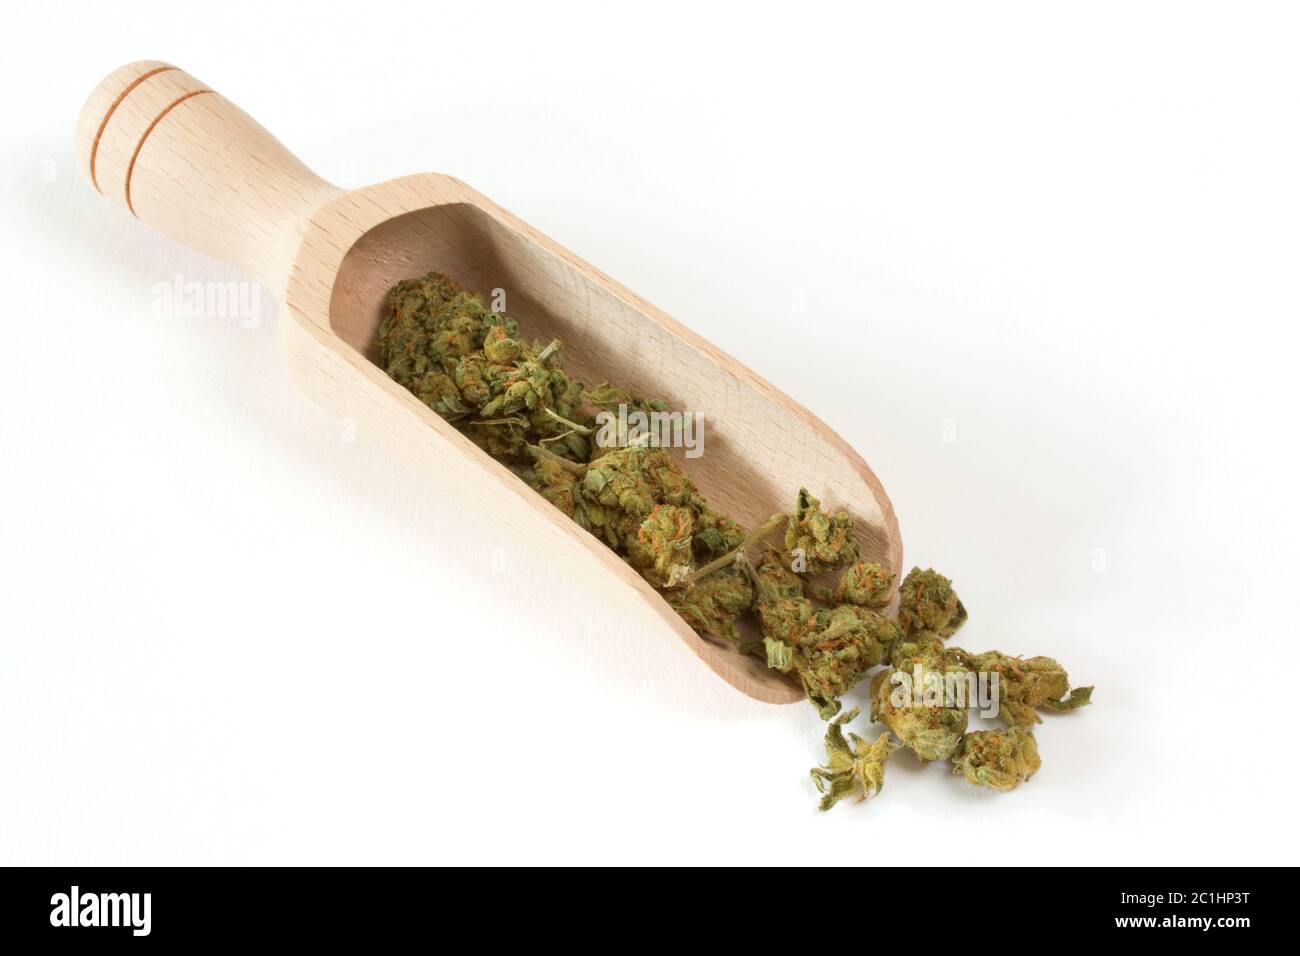 dried buds of cannabis Stock Photo